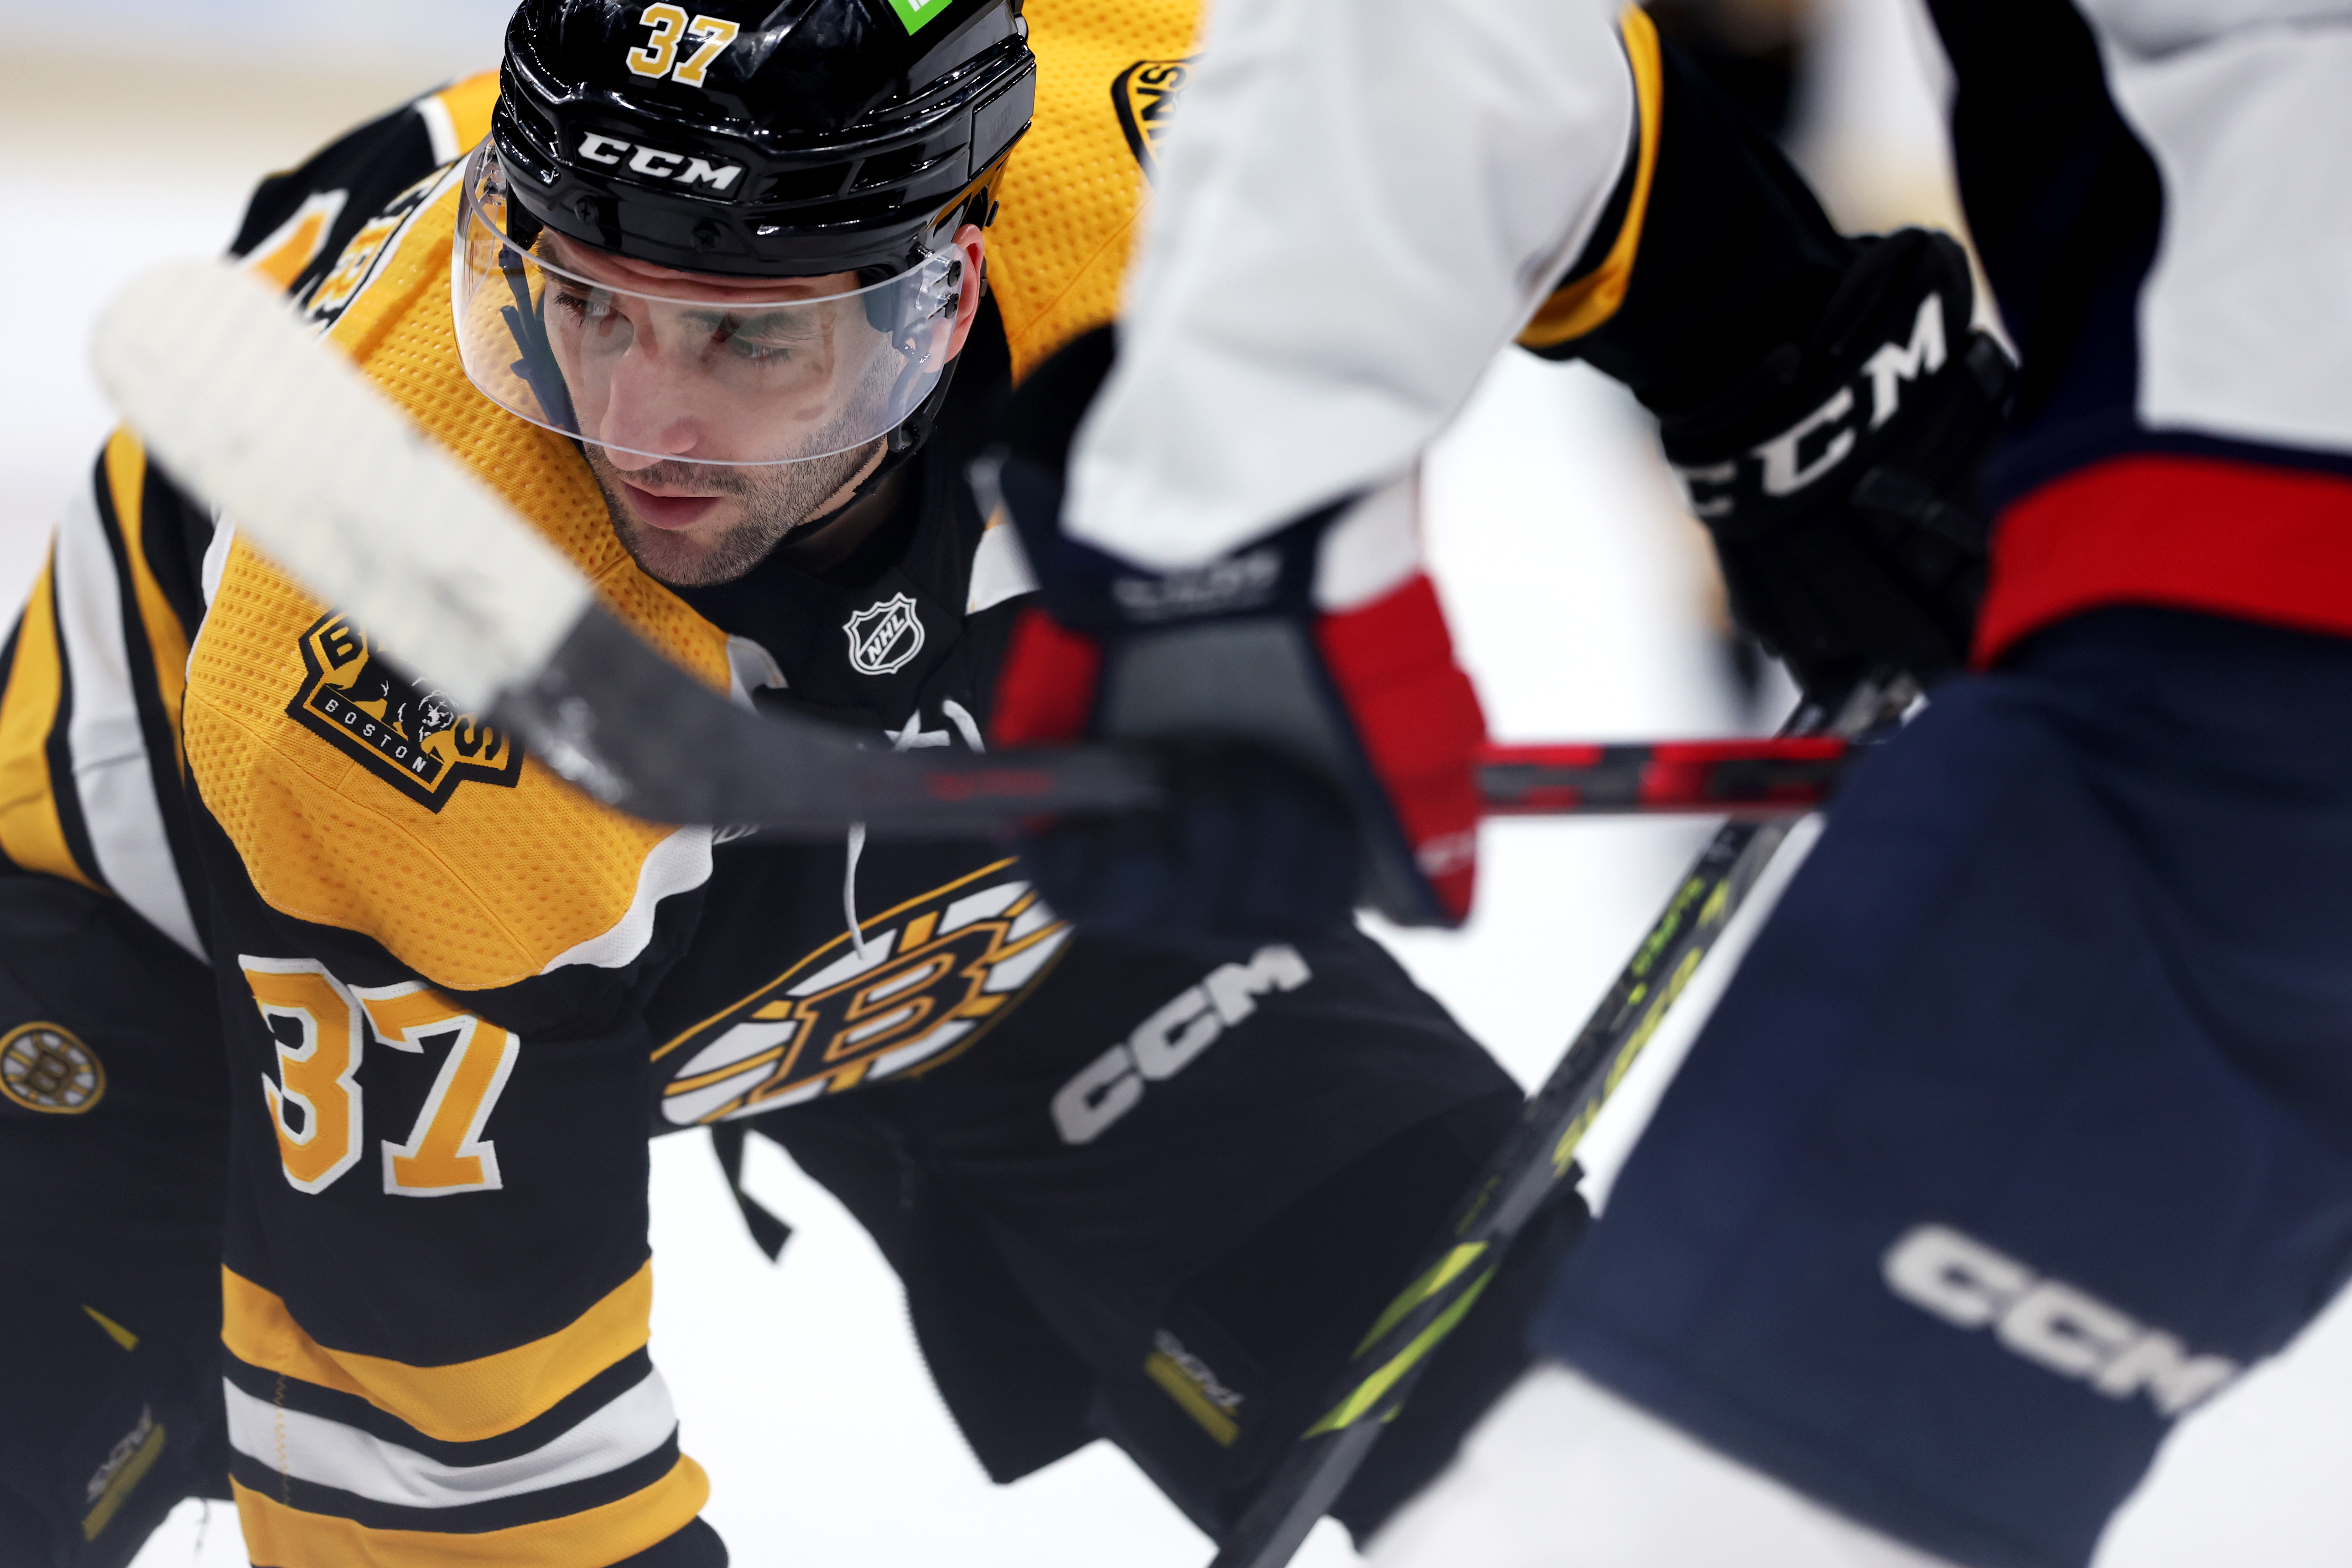 As I step away today, I have no regrets': Bruins captain Patrice